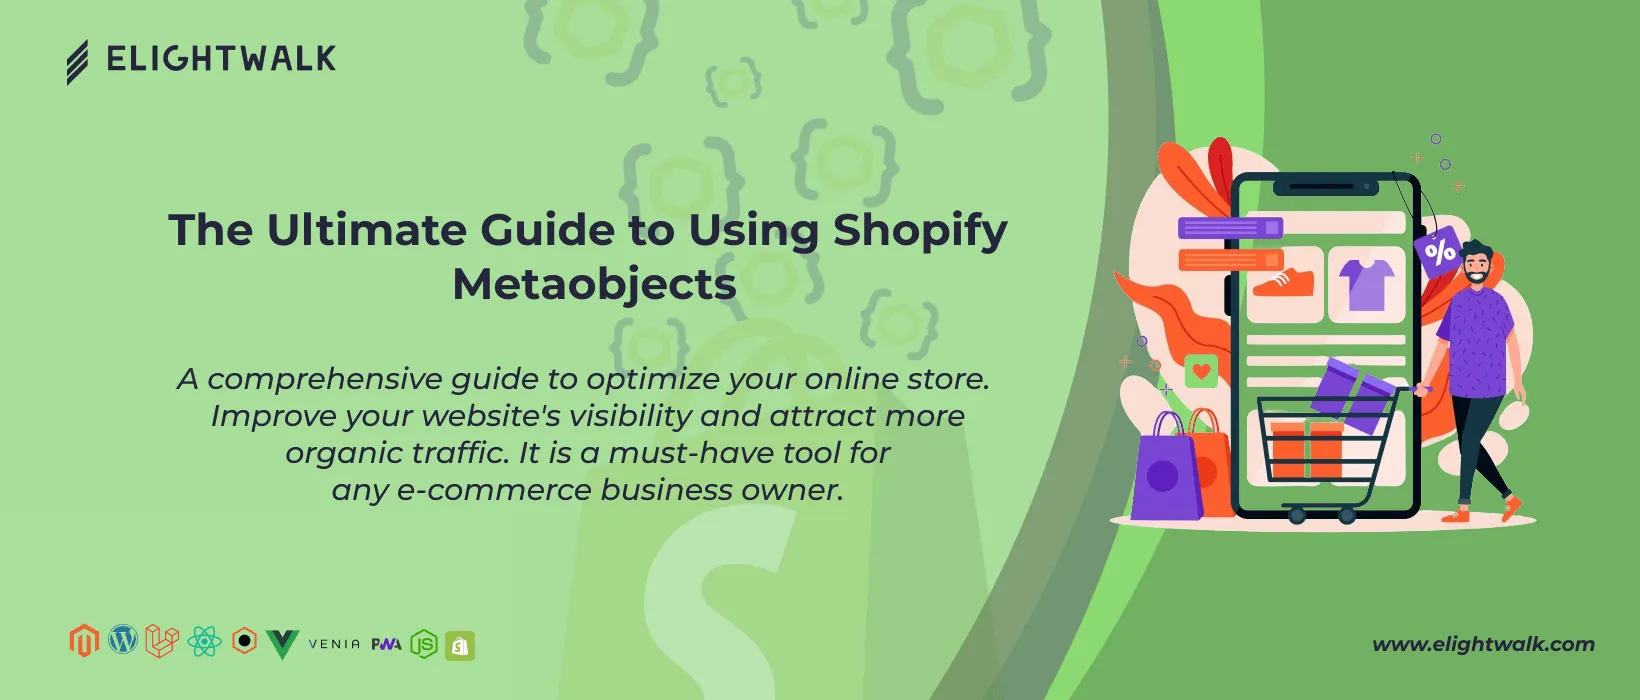 ultimate guide for shopify metaobjects